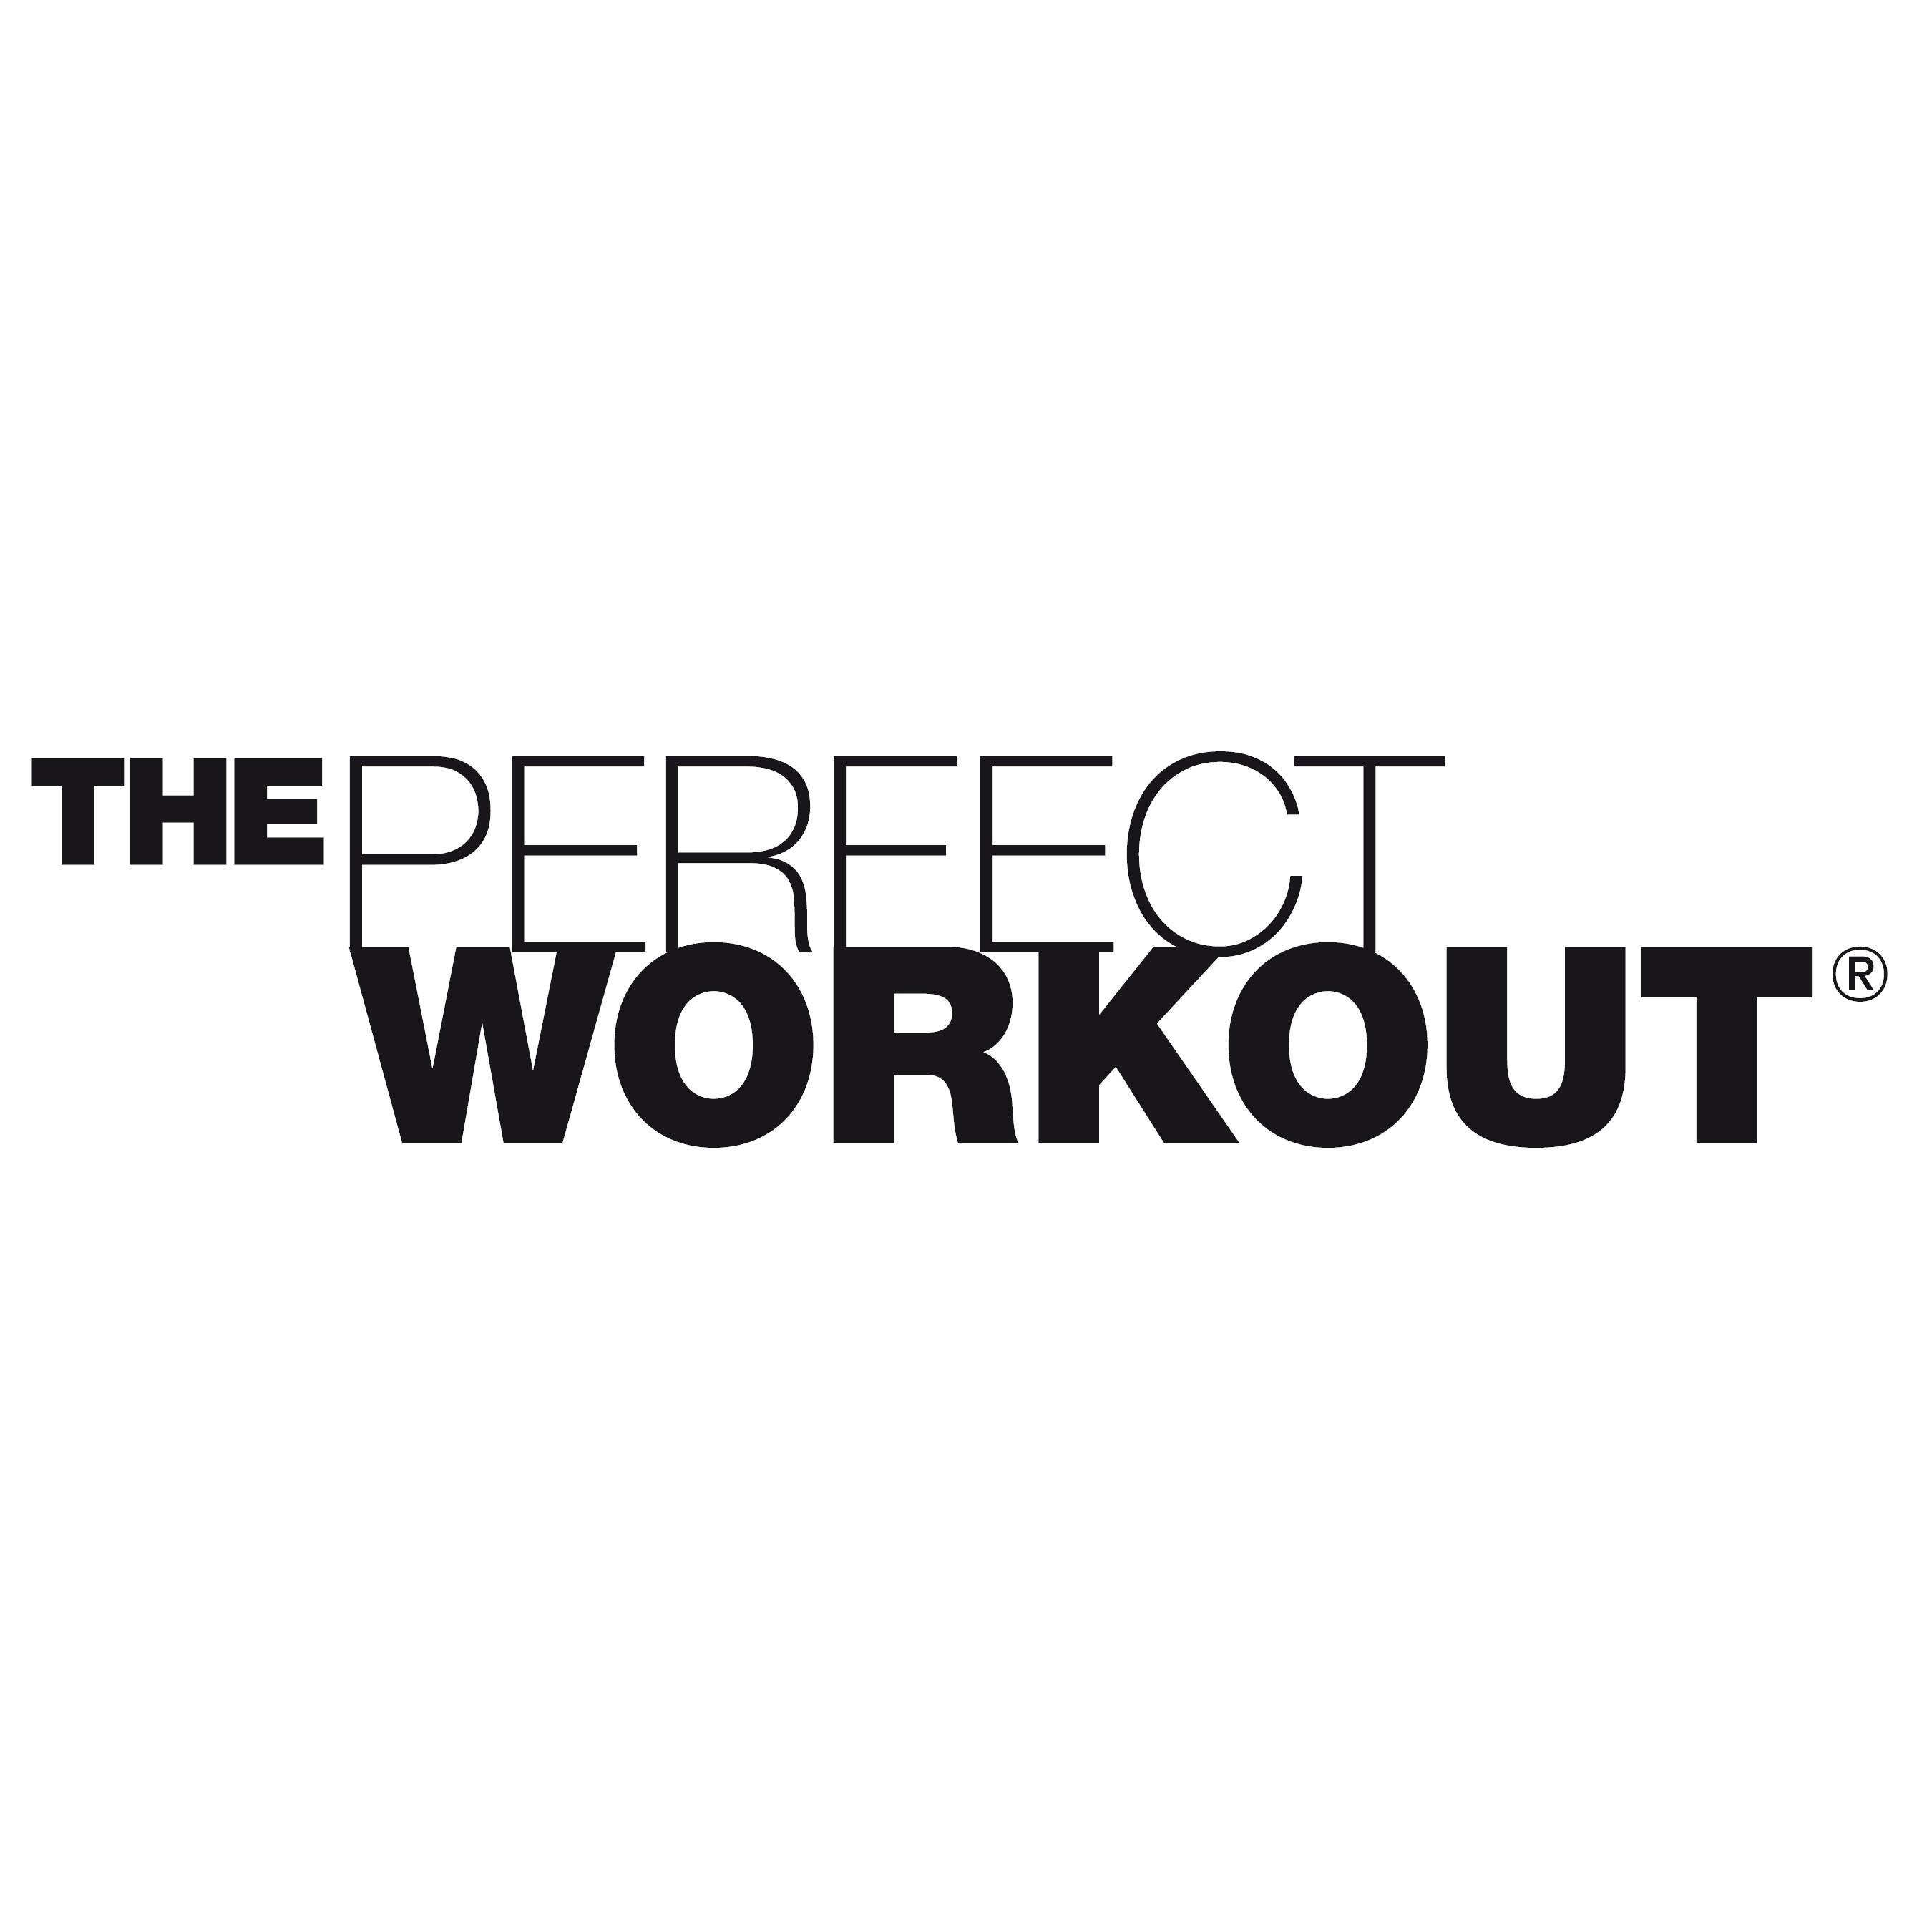 The Perfect Workout - Long Beach, CA 90806 - (844)403-1120 | ShowMeLocal.com